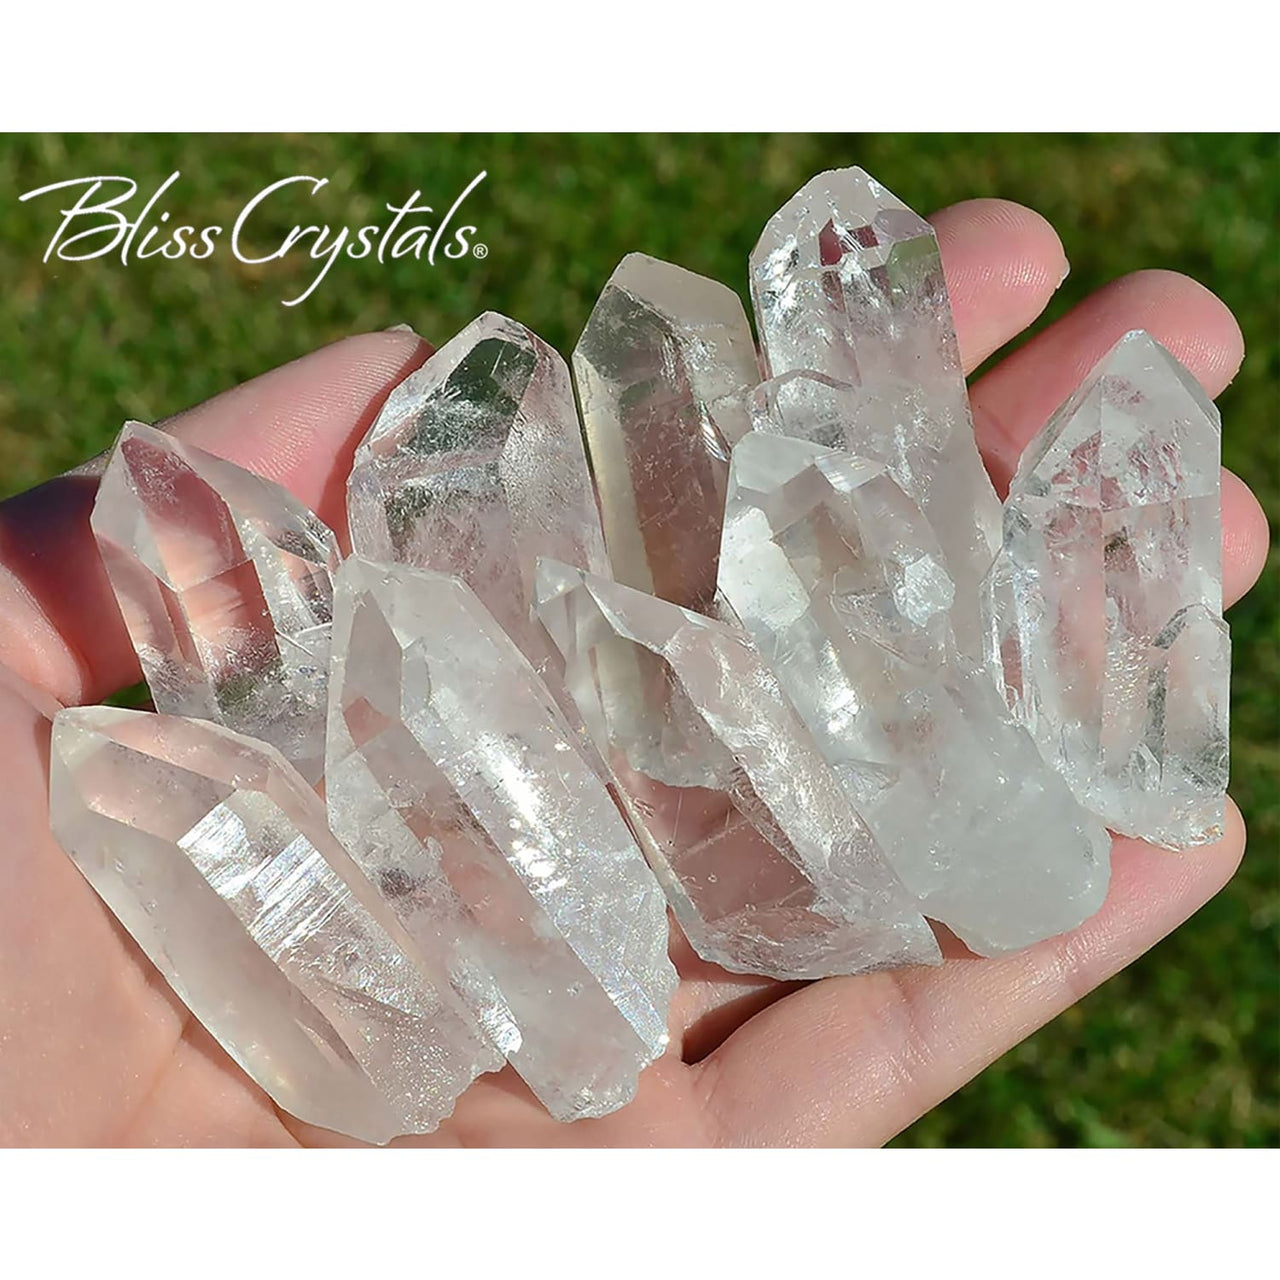 Set of 2 Large Rough CLEAR QUARTZ Crystal Points (1.5in+ ea)